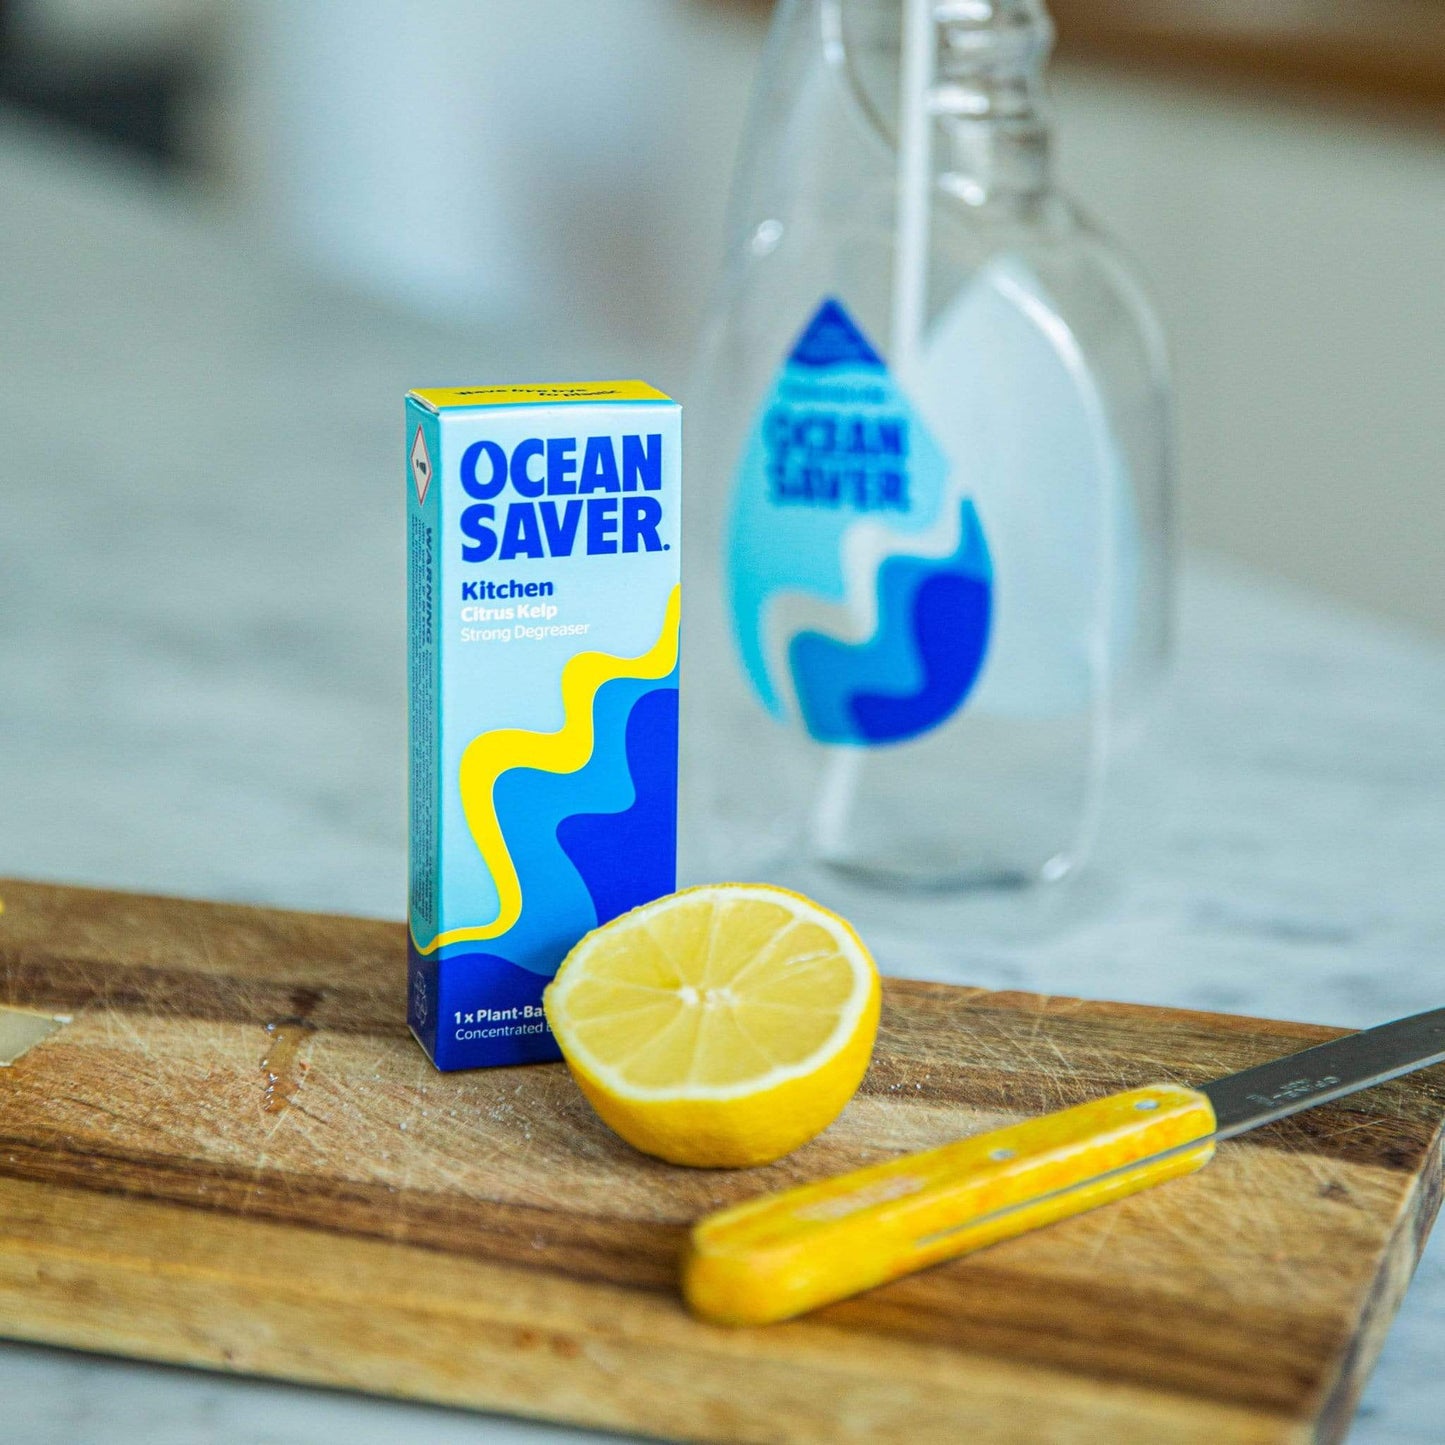 Ocean Saver Cleaning Detergents Ocean Saver Cleaners Refill EcoDrops - 3 for €6